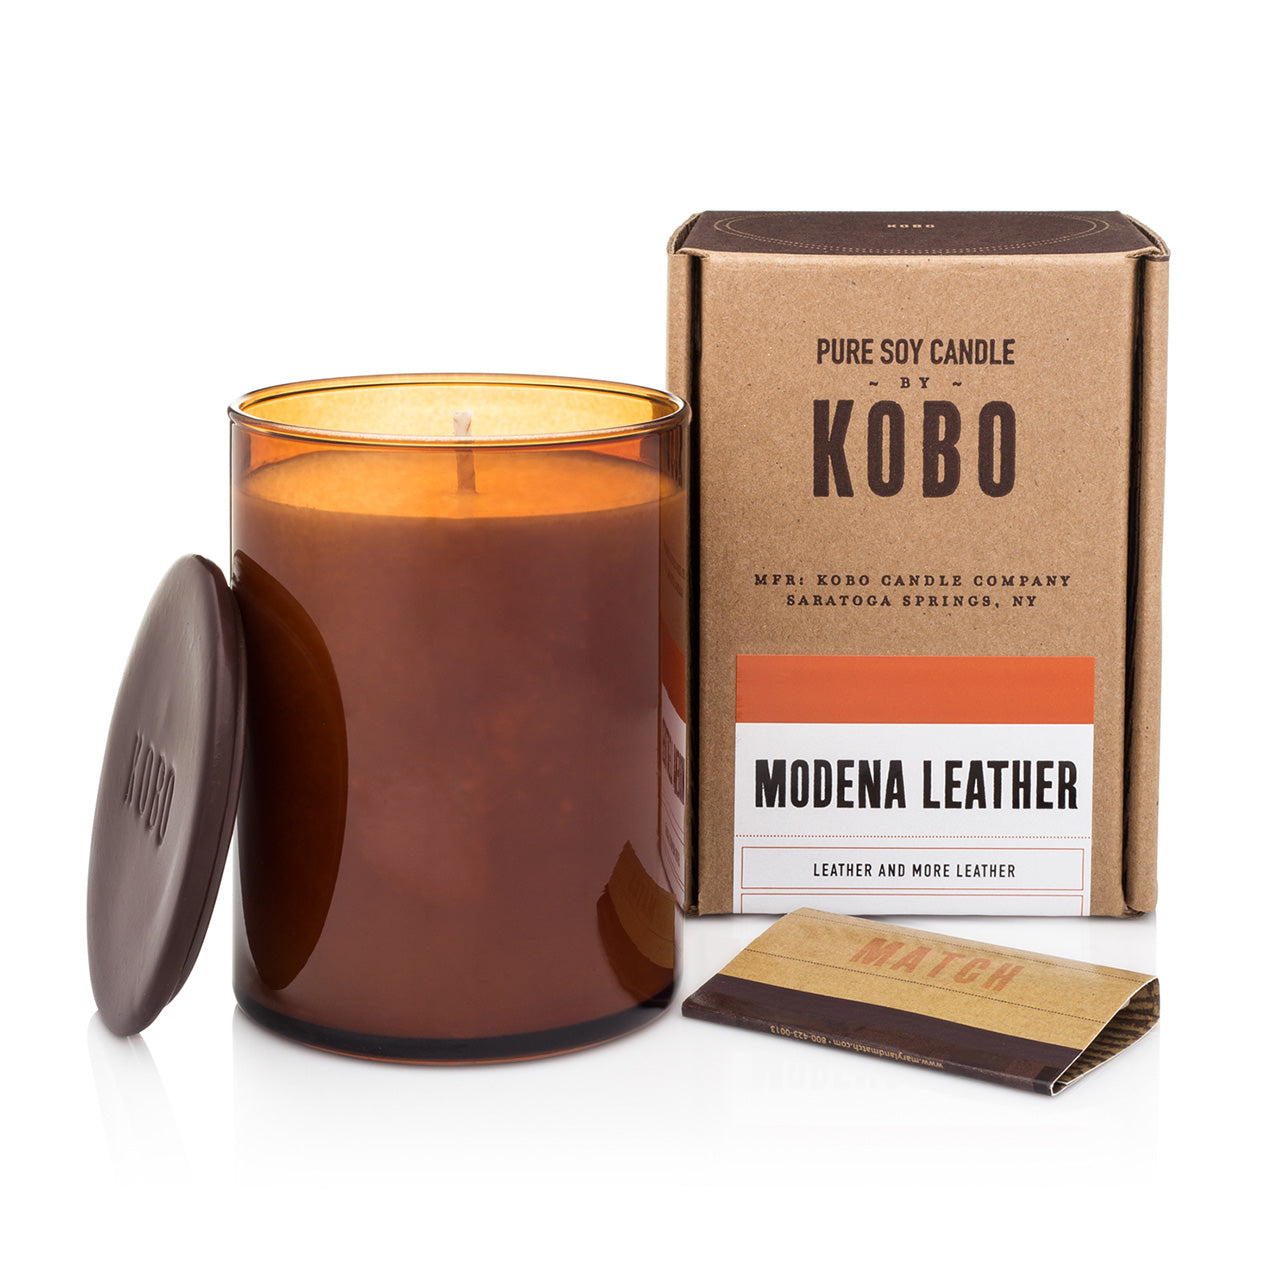 Kobo Large Pure Soy Candle in an amber glass jar with ceramic lid, matches and kraft box. Dark Cassis scent